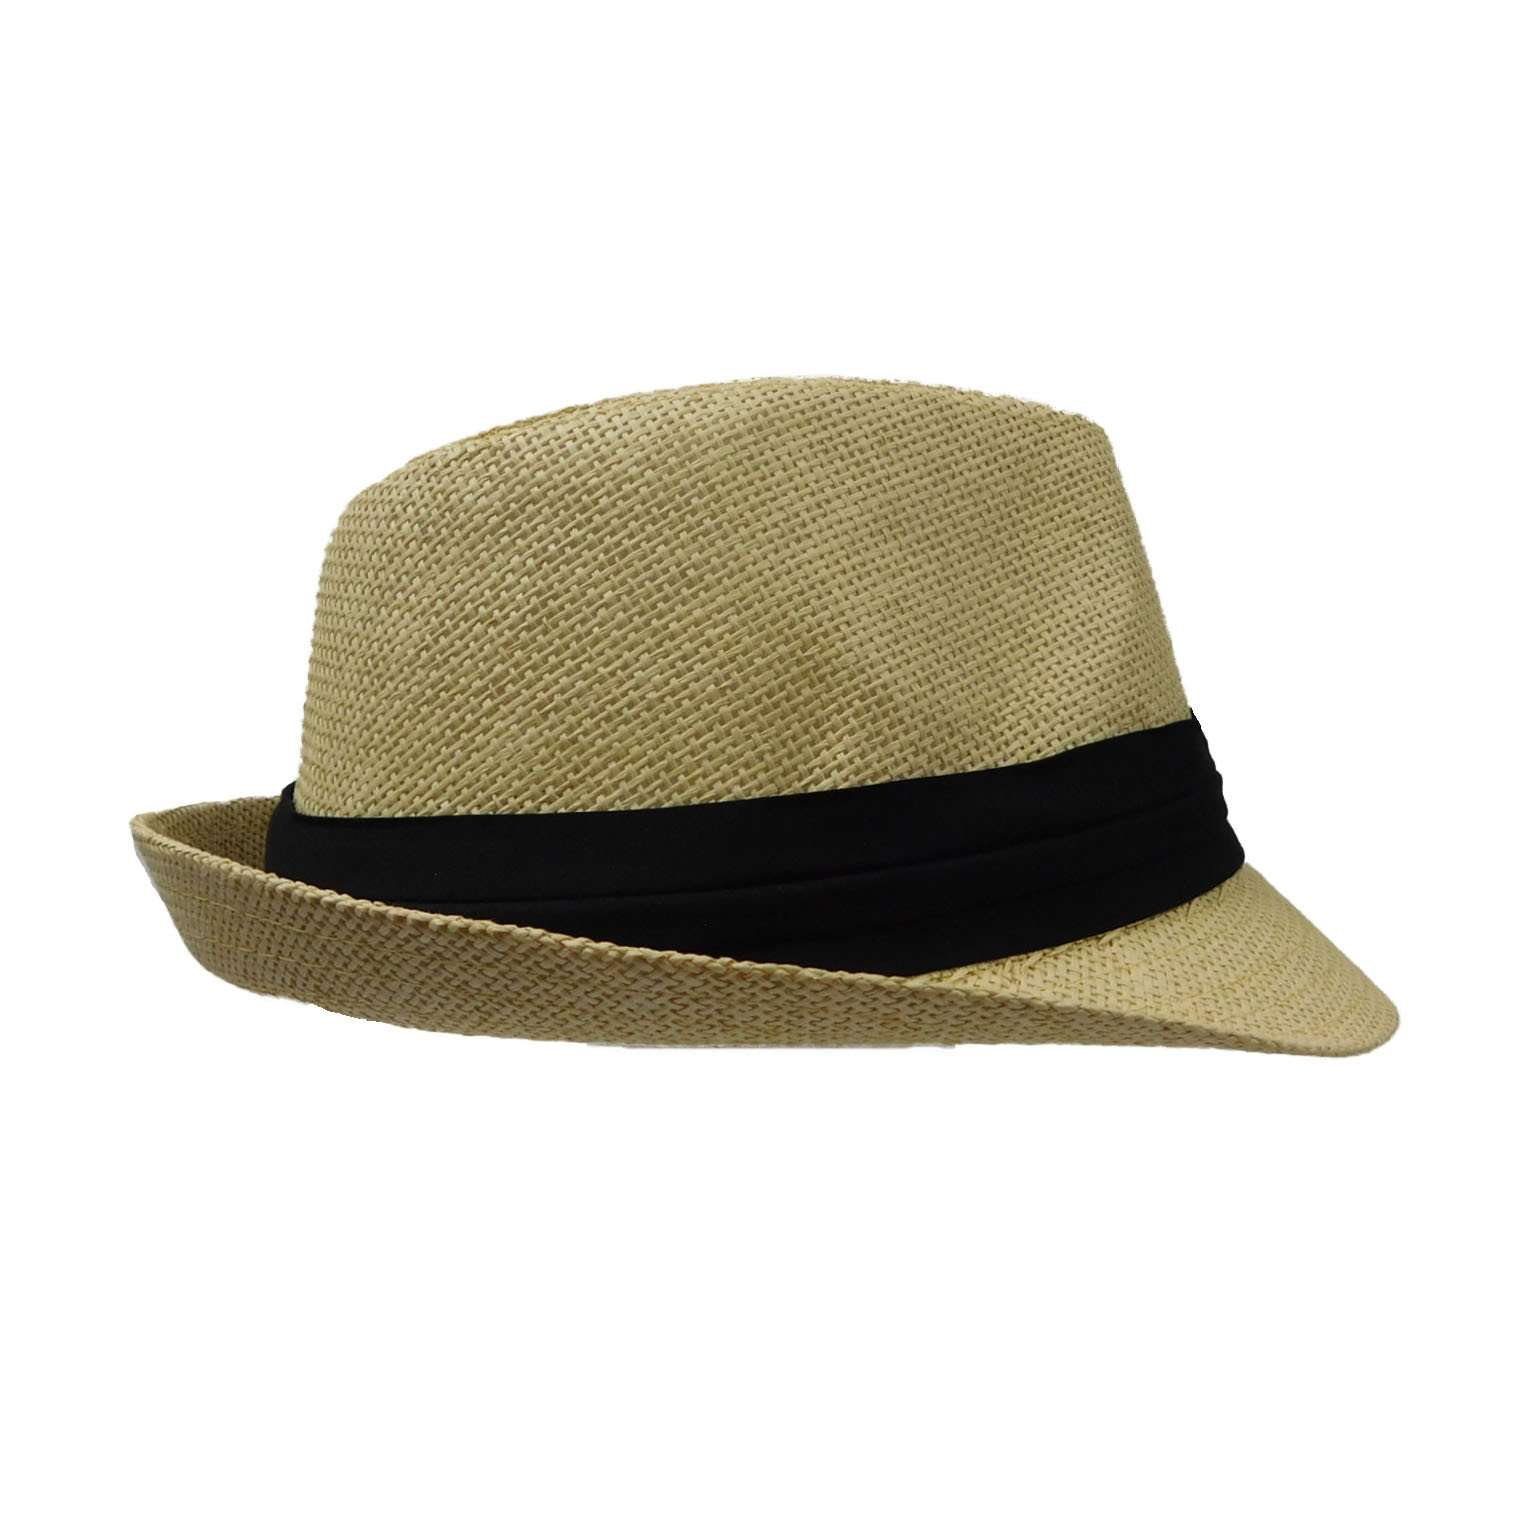 Traditional Summer Fedora Hat - Small to XLarge Hat Sizes ...